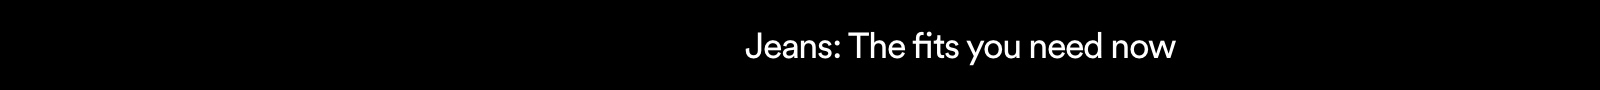 Jeans. The fits you need now.